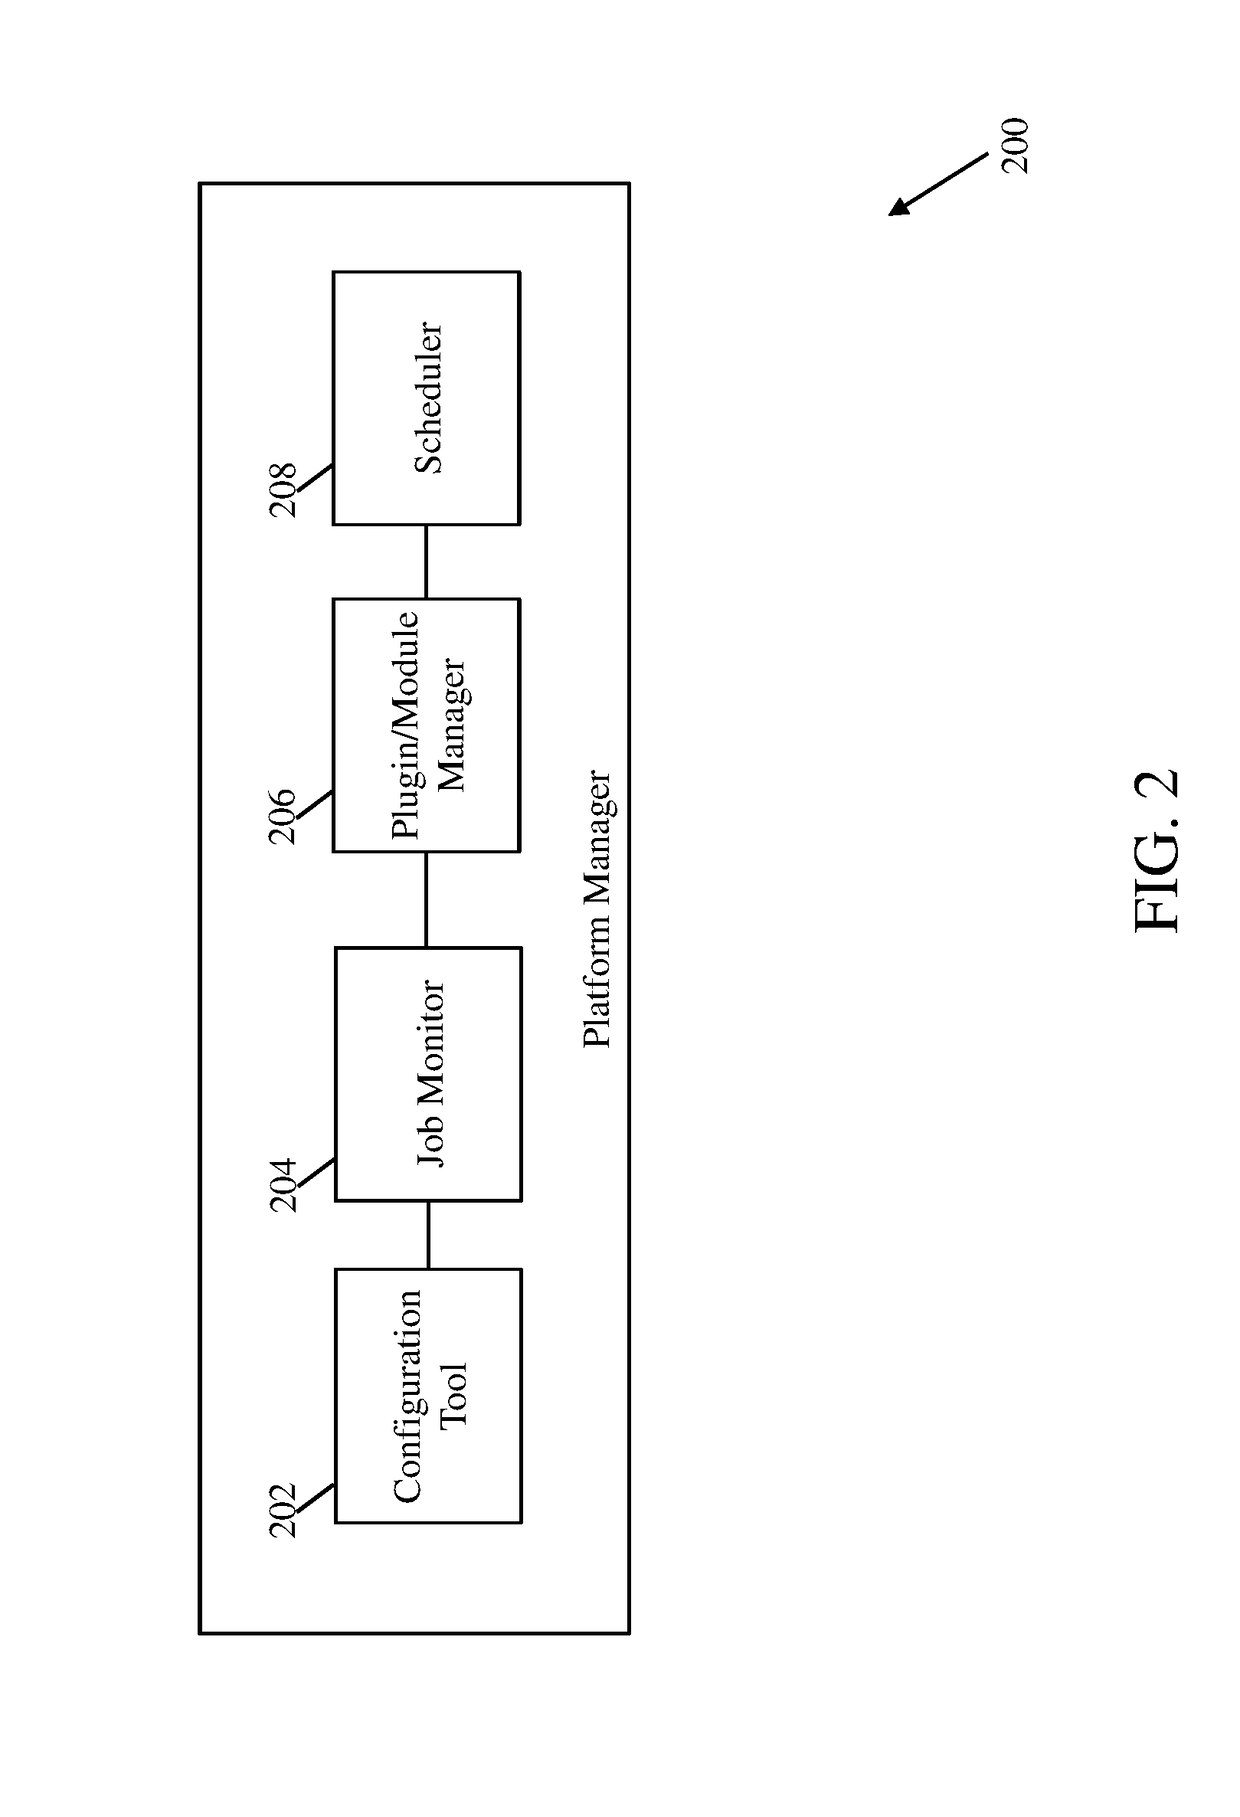 System and Method for Automatically Extracting and Analyzing Data